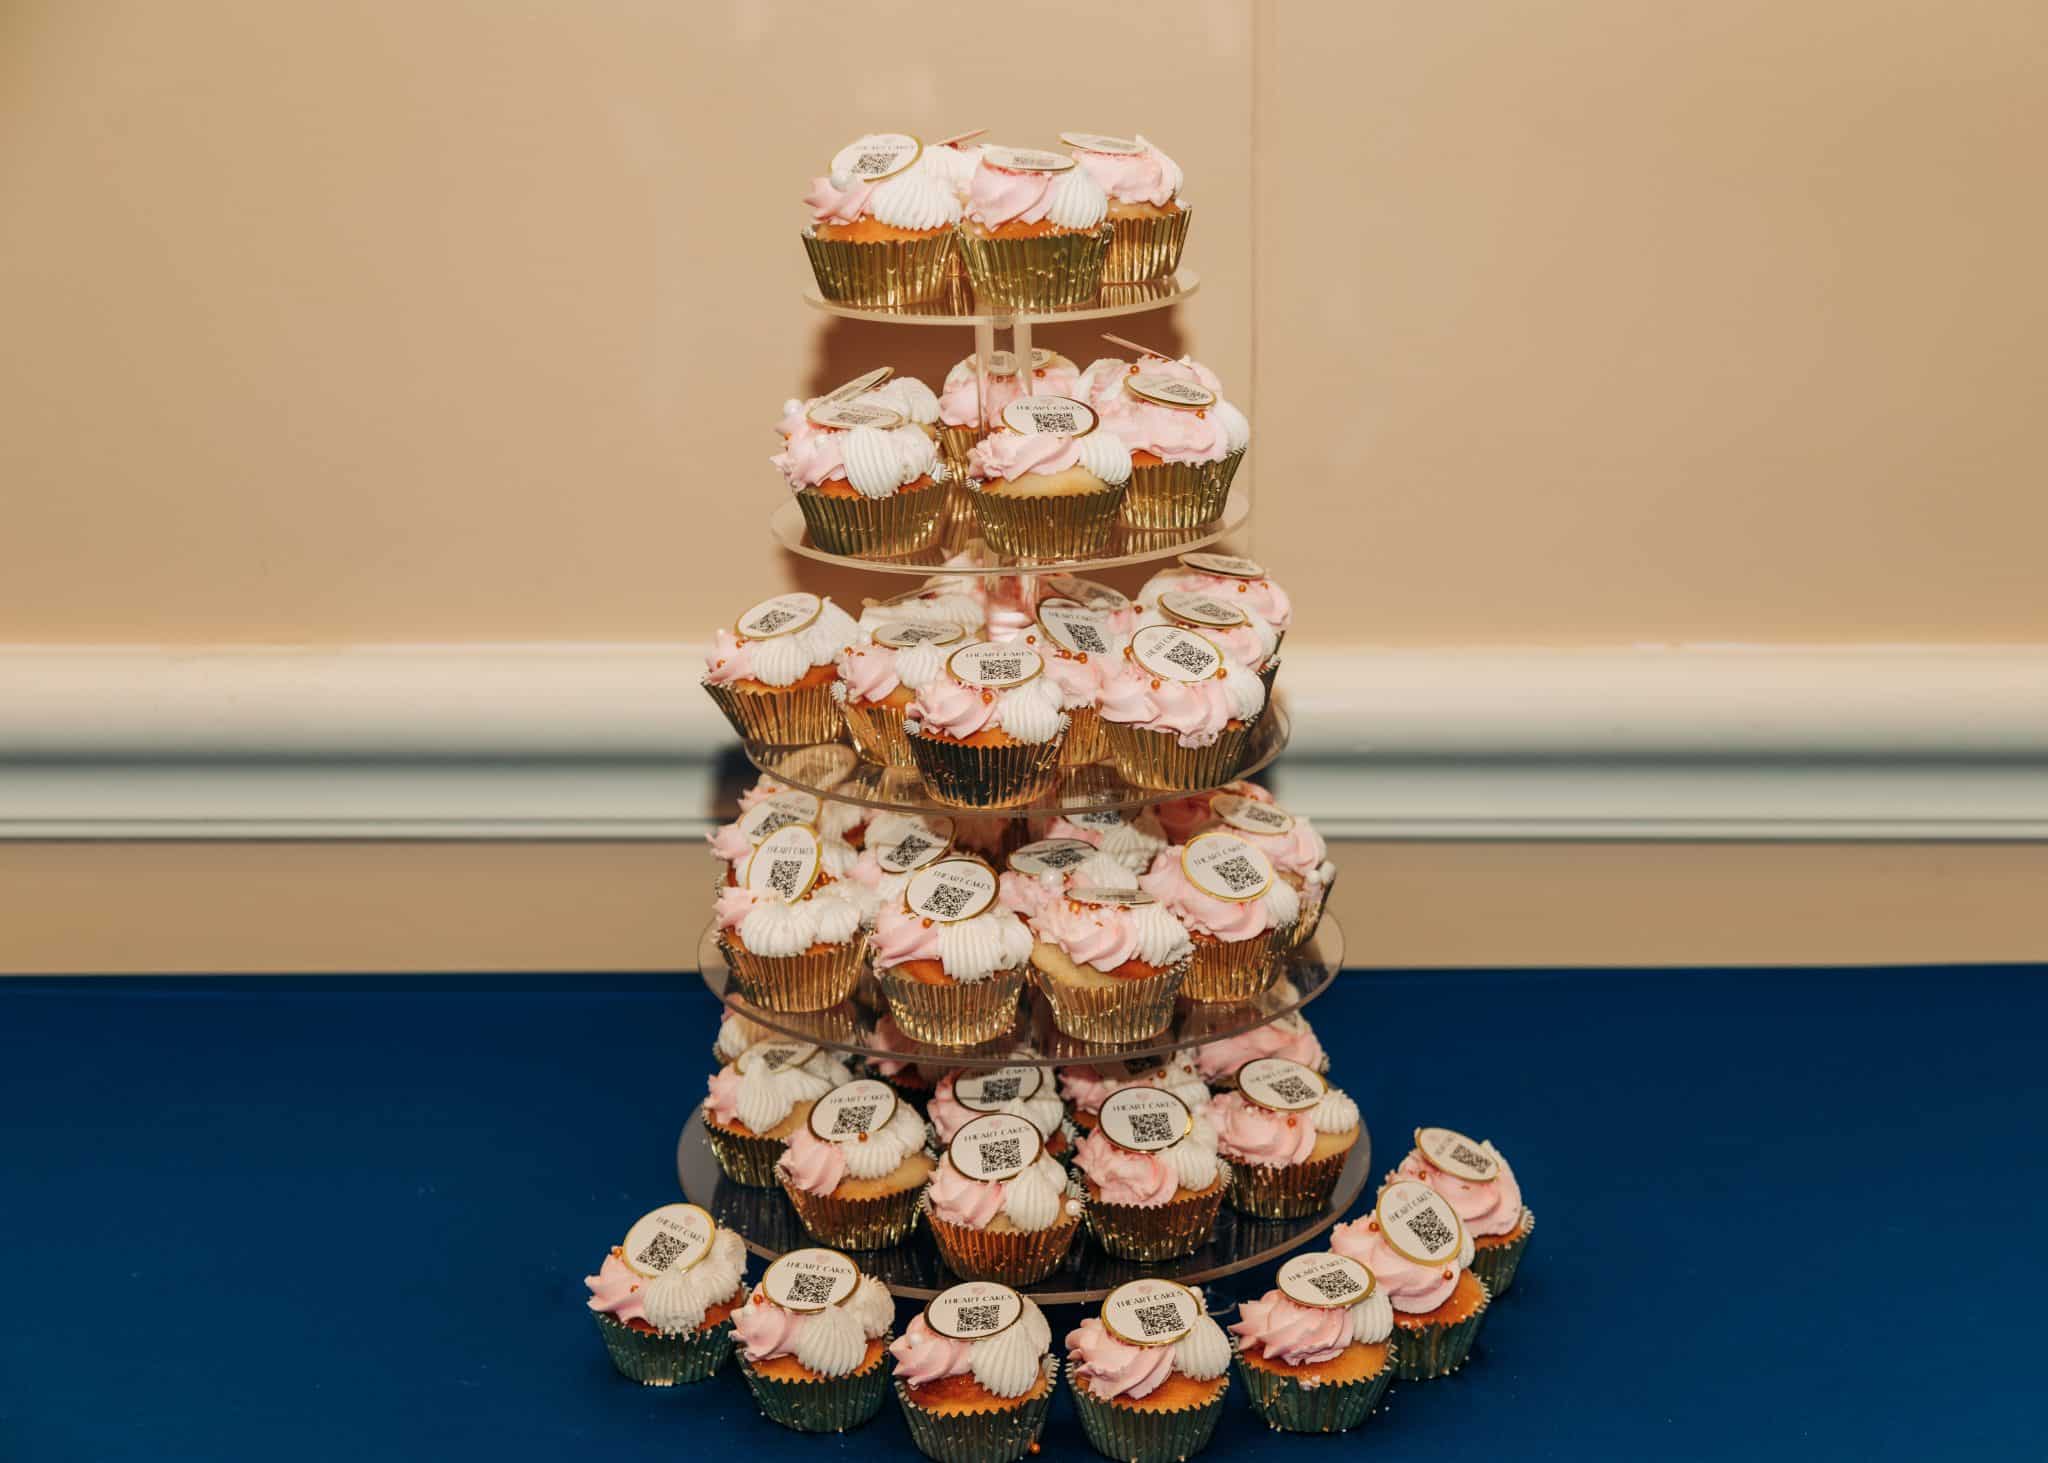 pink and white cupcakes stacked on tower on top of blue surface